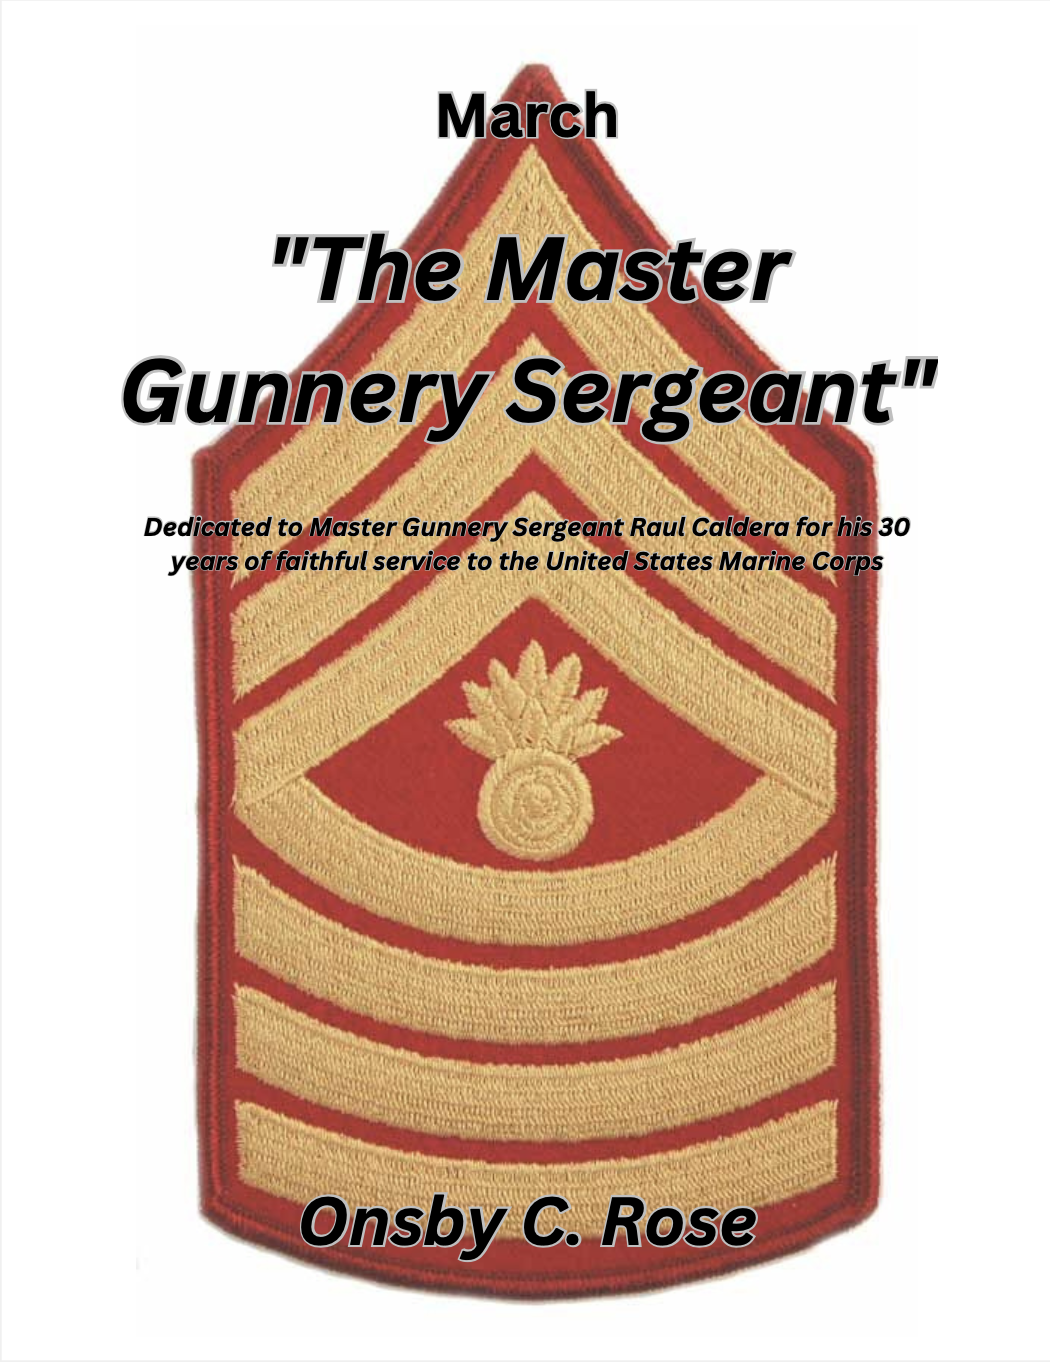 The Master Gunnery Sargent (Score Only) by Onsby C. Rose